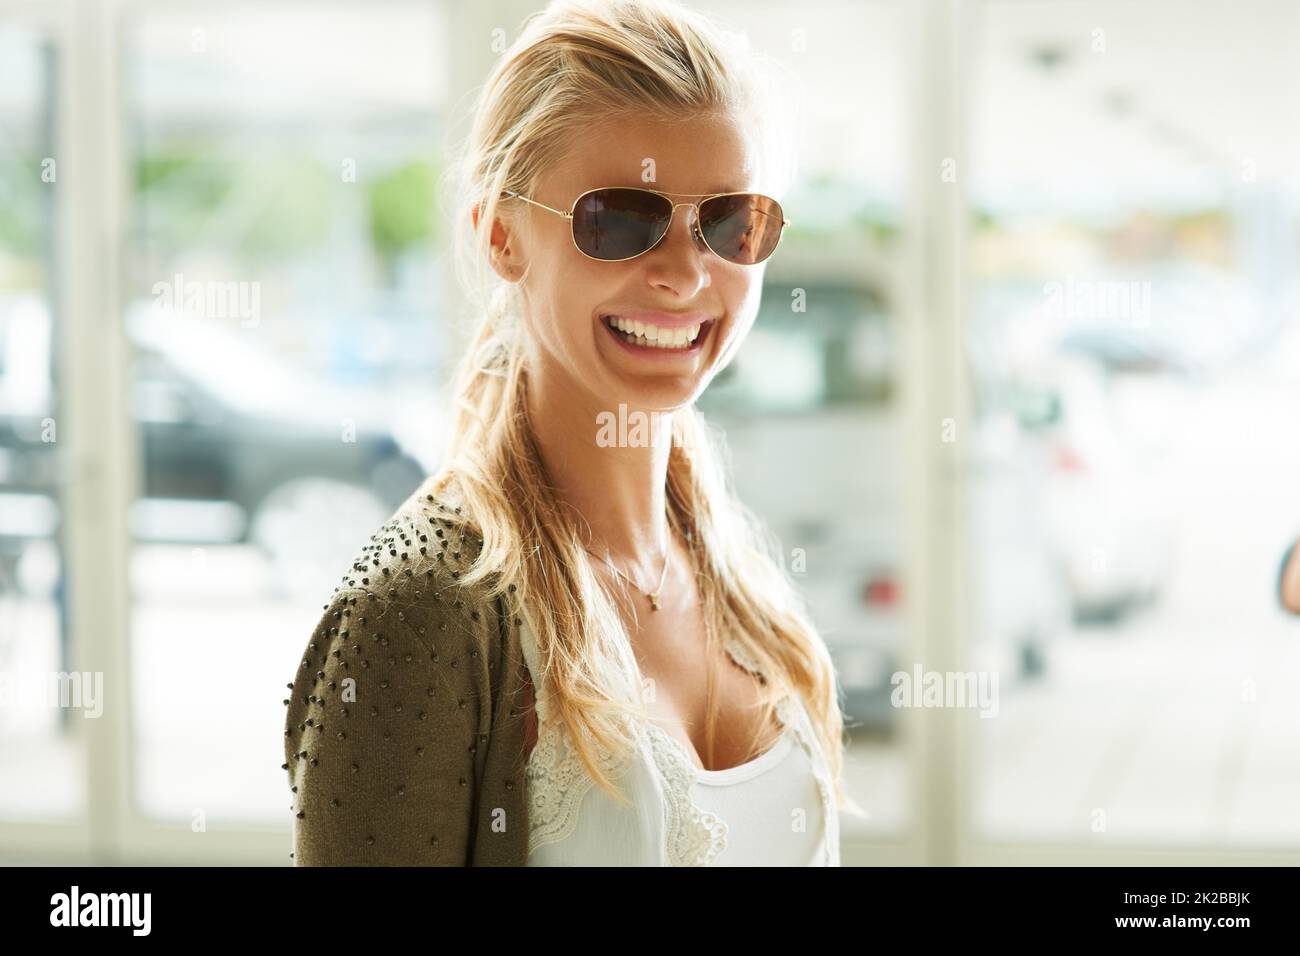 Arriving in style. Pretty young woman wearing fashionable sunglasses and smiling. Stock Photo